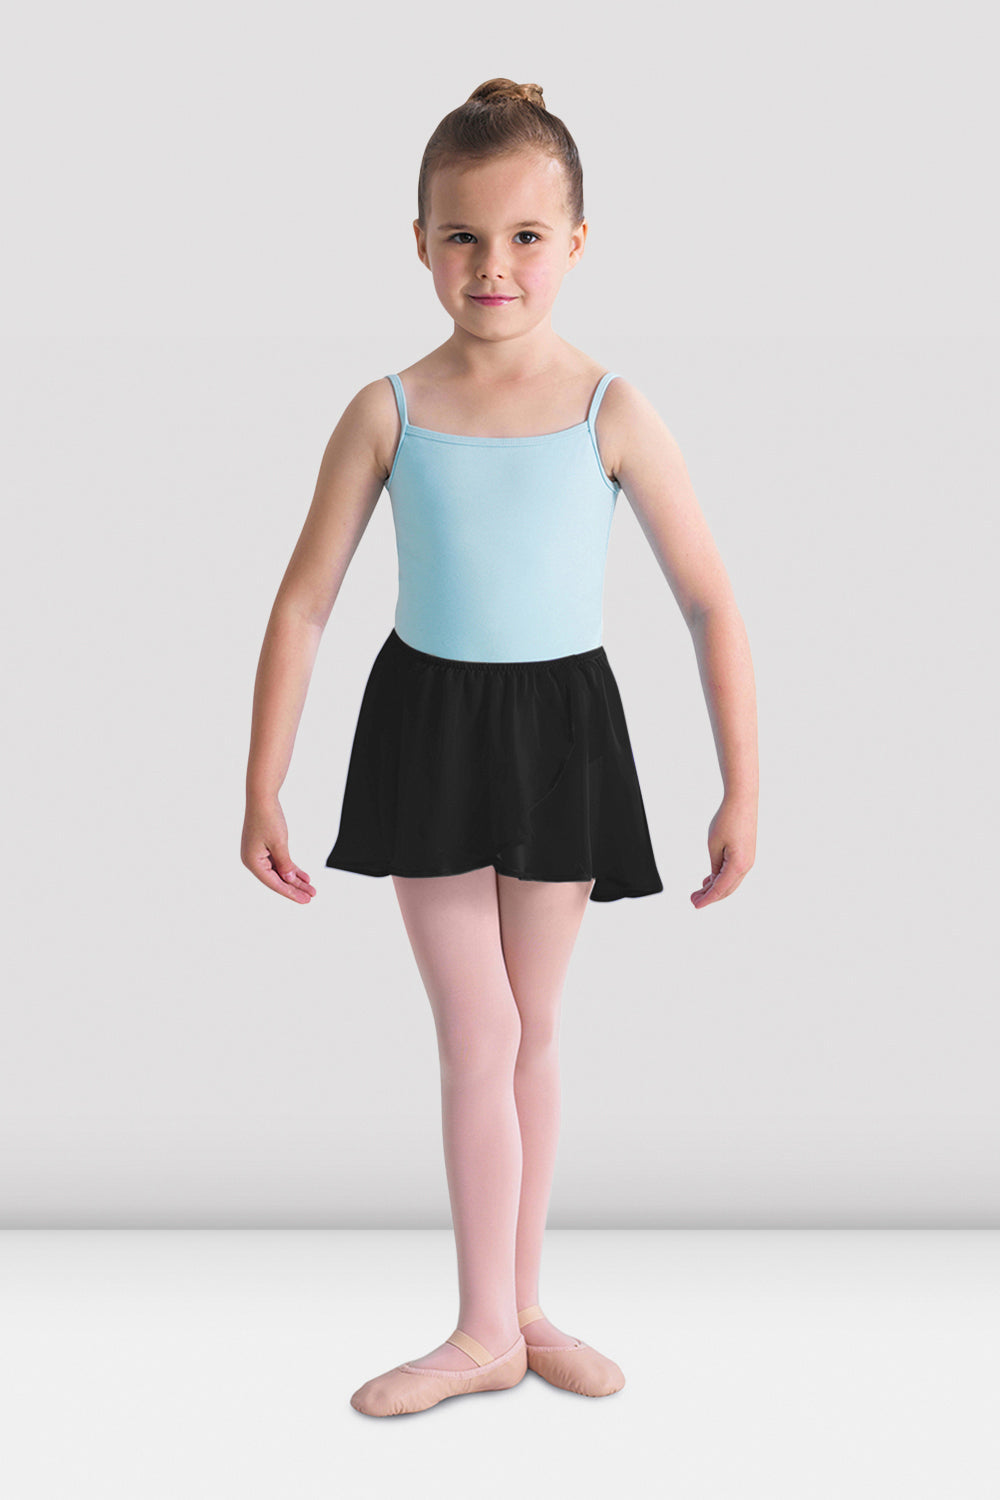 Barre Skirt - MORE COLORS